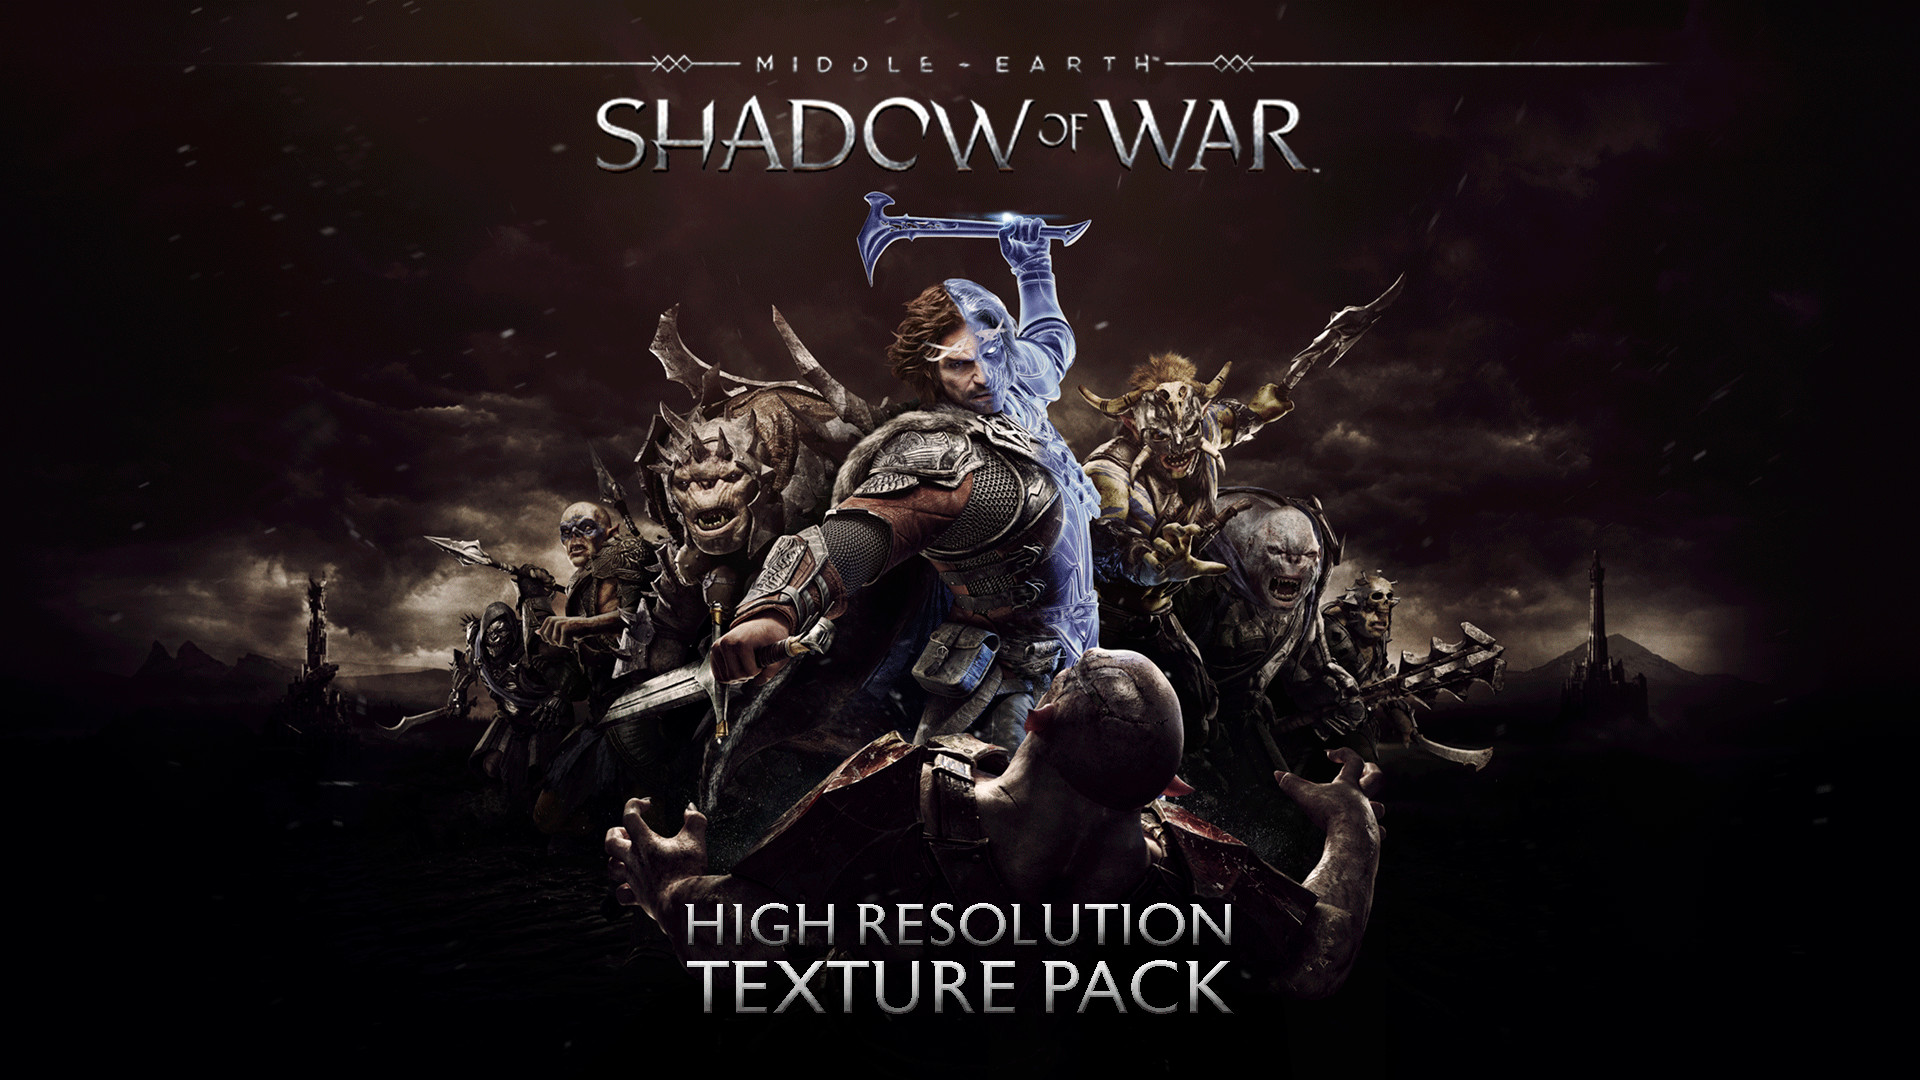 Middle-earth™: Shadow of War™ High Resolution Texture Pack Featured Screenshot #1